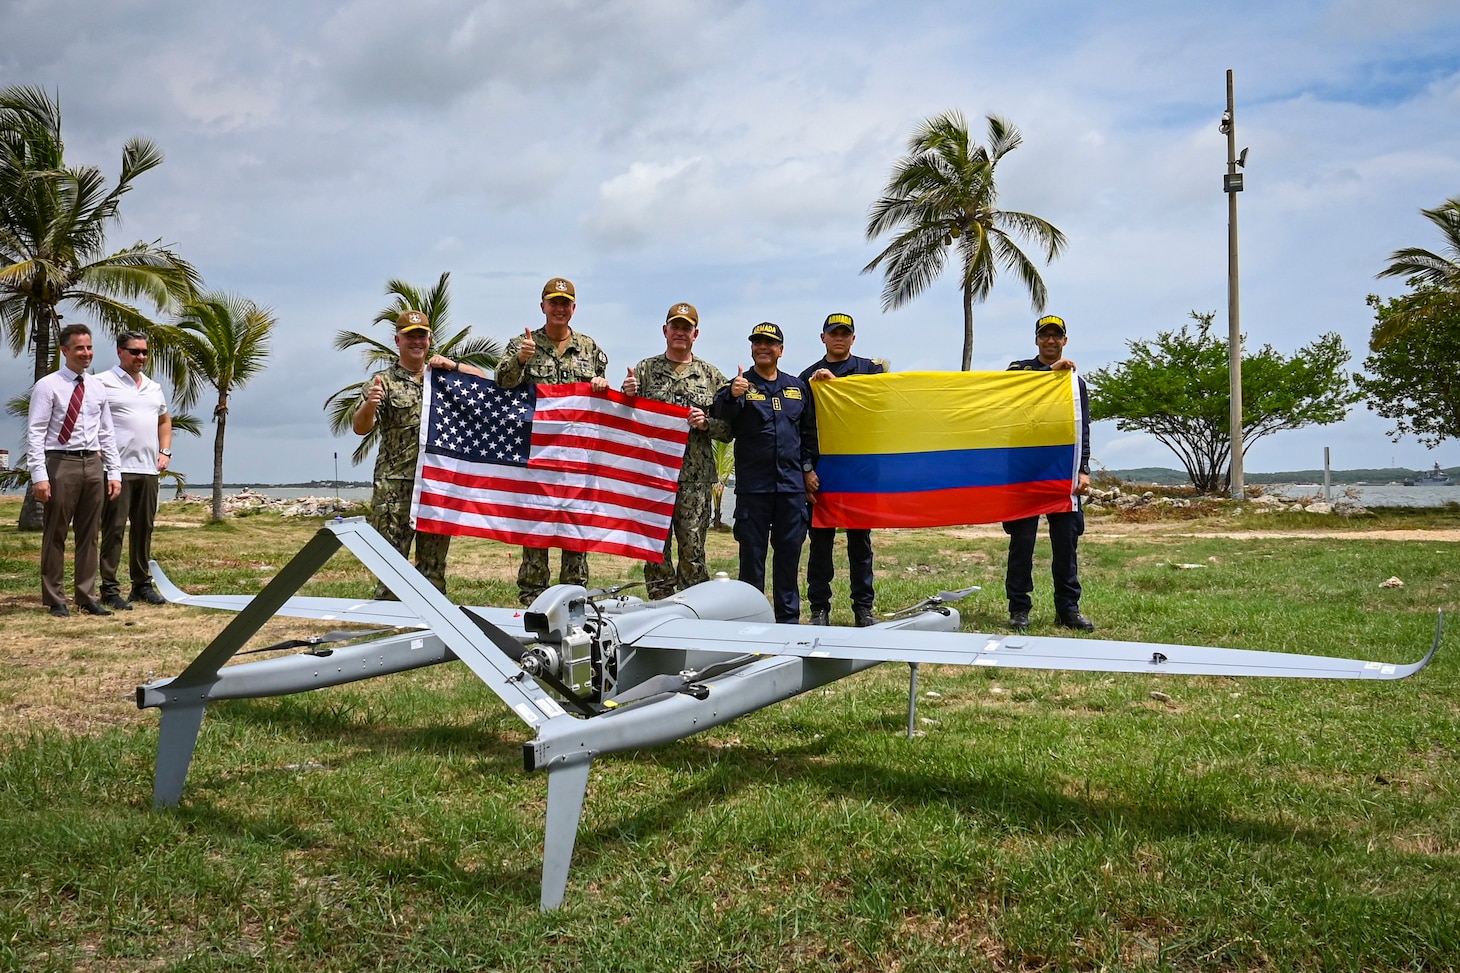 Photos of NITAS members from Colombia and the Republic of Korea discuss the Aerosonde MK4.7 Hybrid Quad unmanned aerial vehicle during demonstration of at the Club Naval Castillogrande during UNITAS LXIV, July 16, 2023.